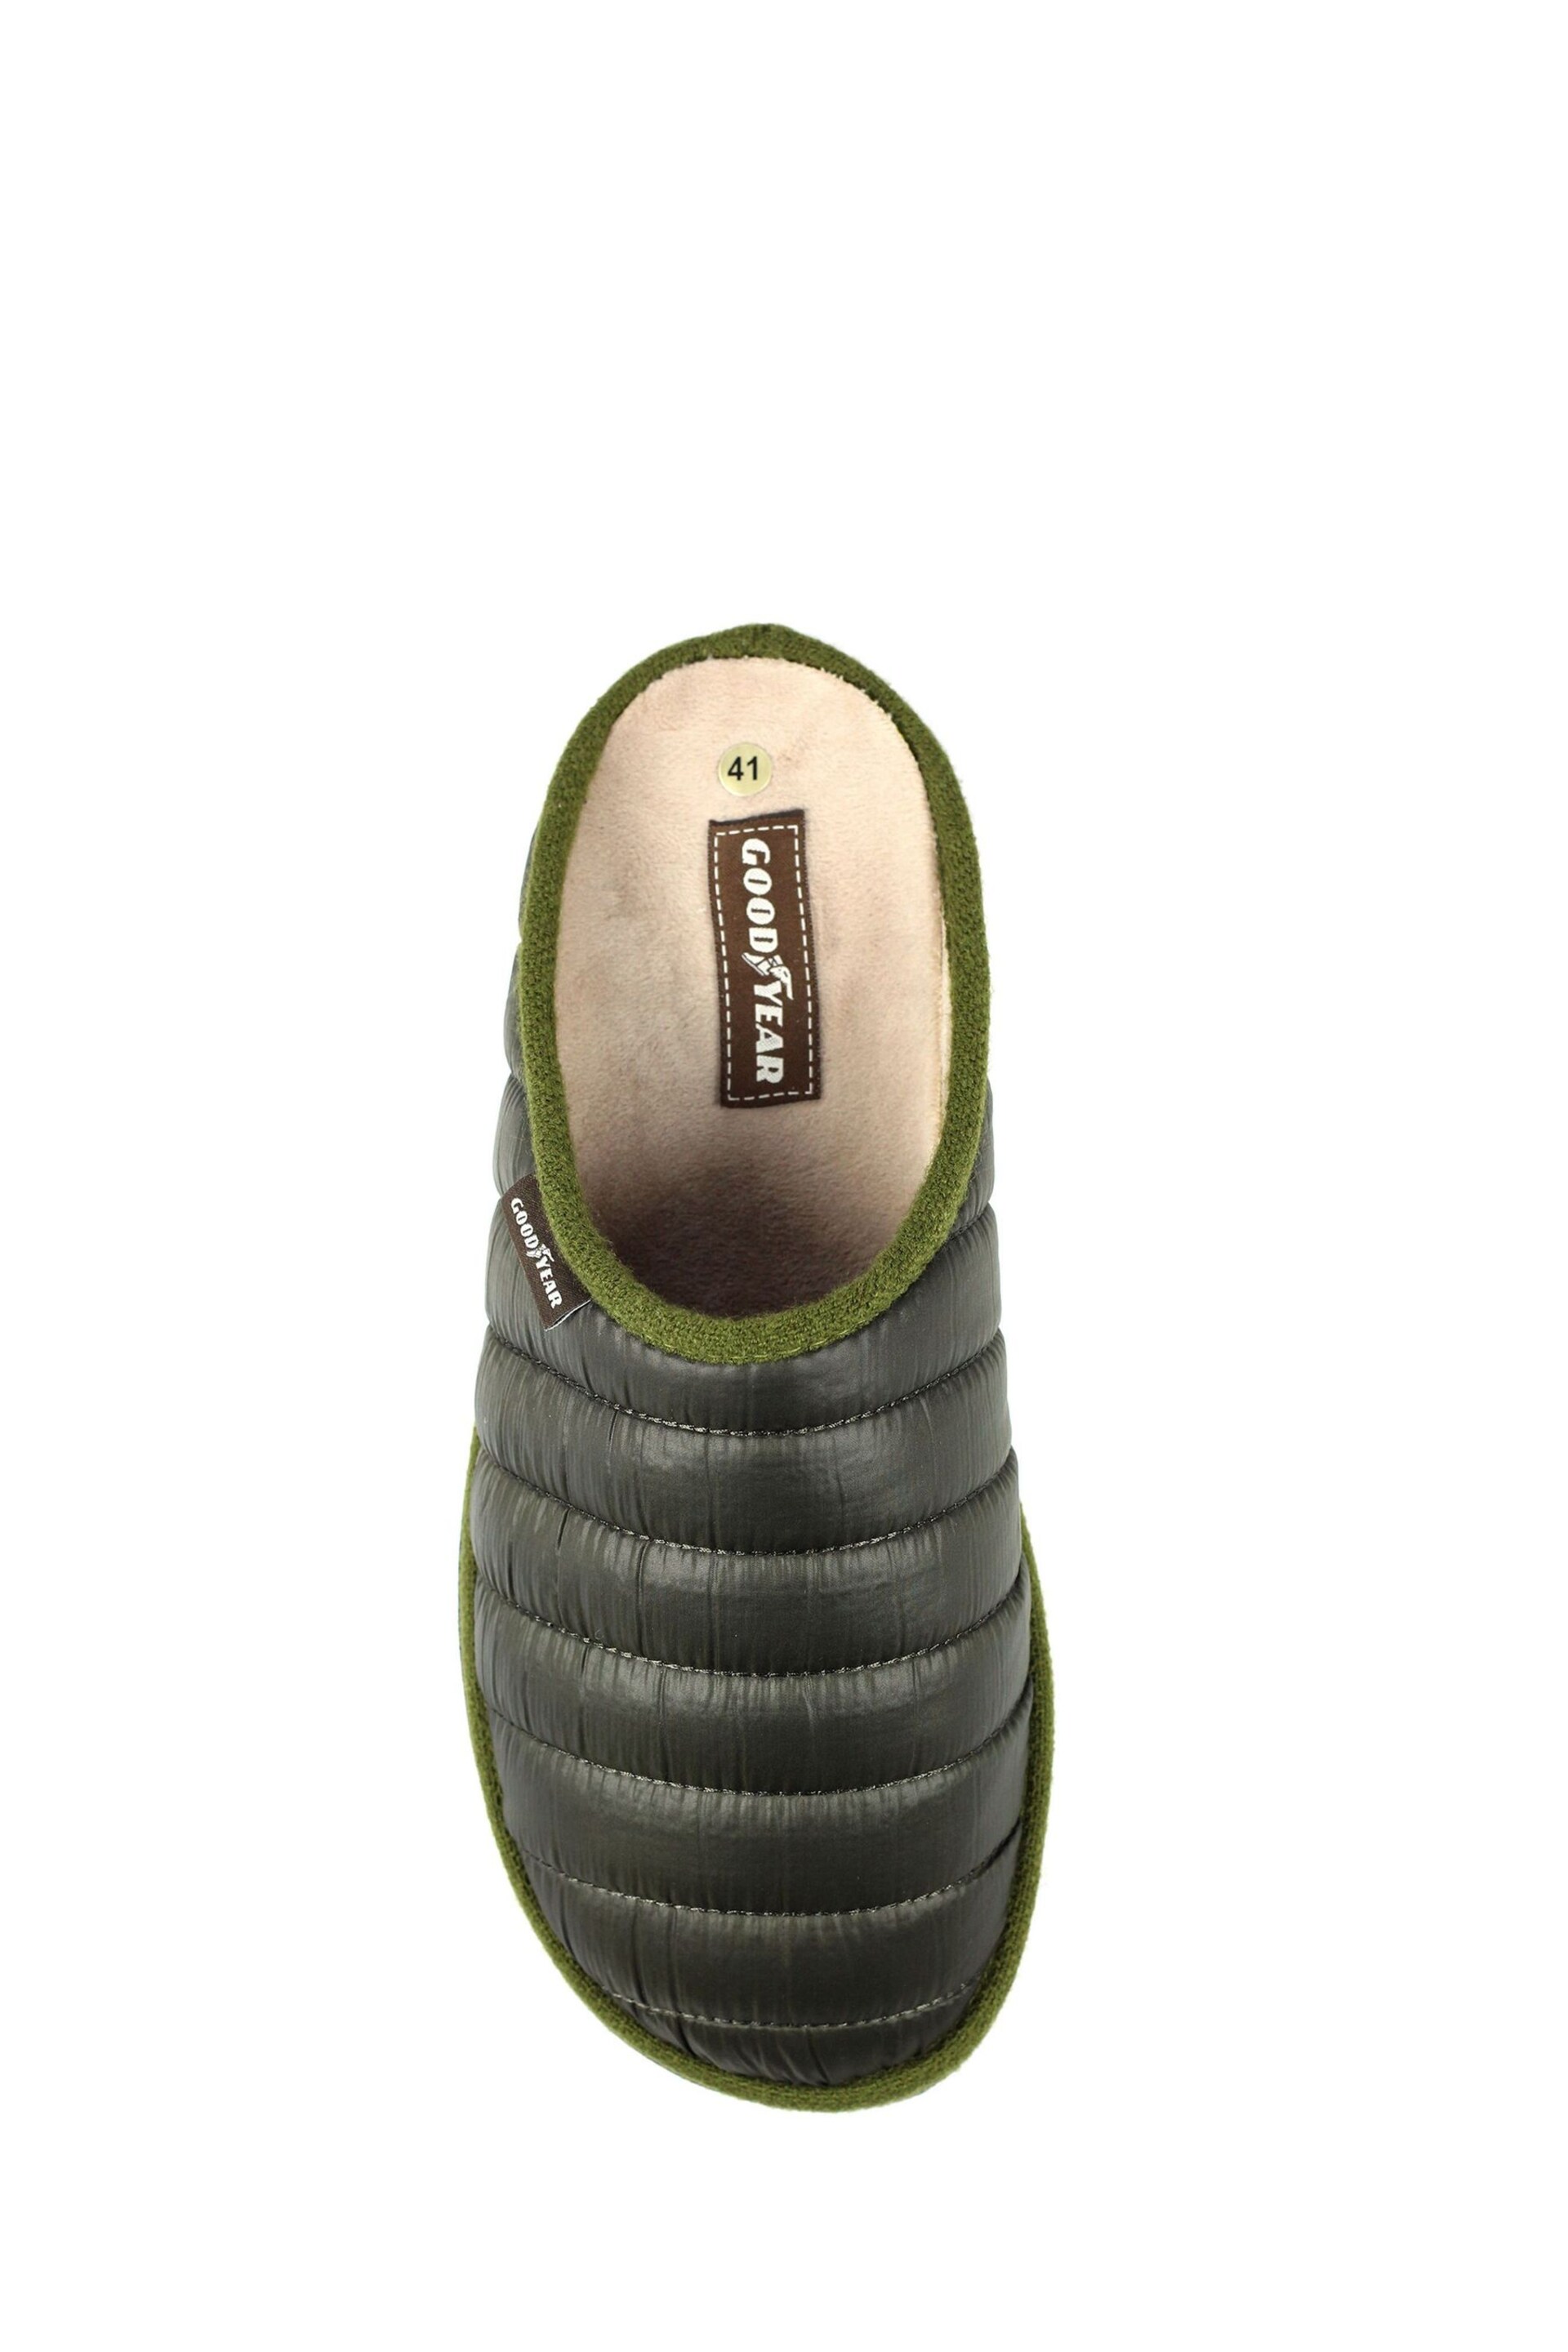 Goodyear Elway Slippers - Image 5 of 6